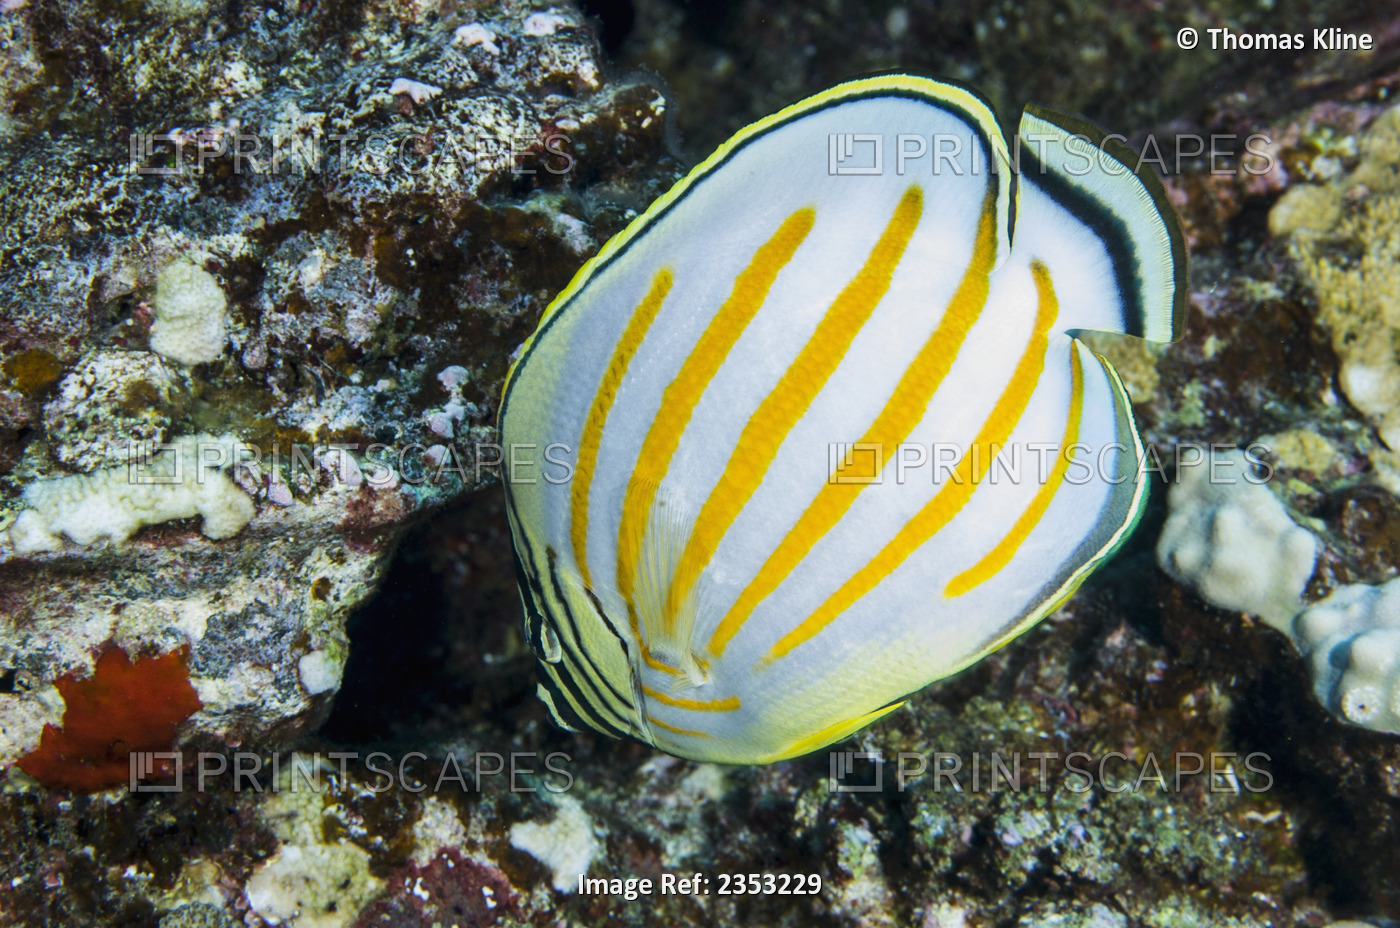 Underwater view of an Ornate Butterflyfish at Molokini Crater, Maui, Hawaii.